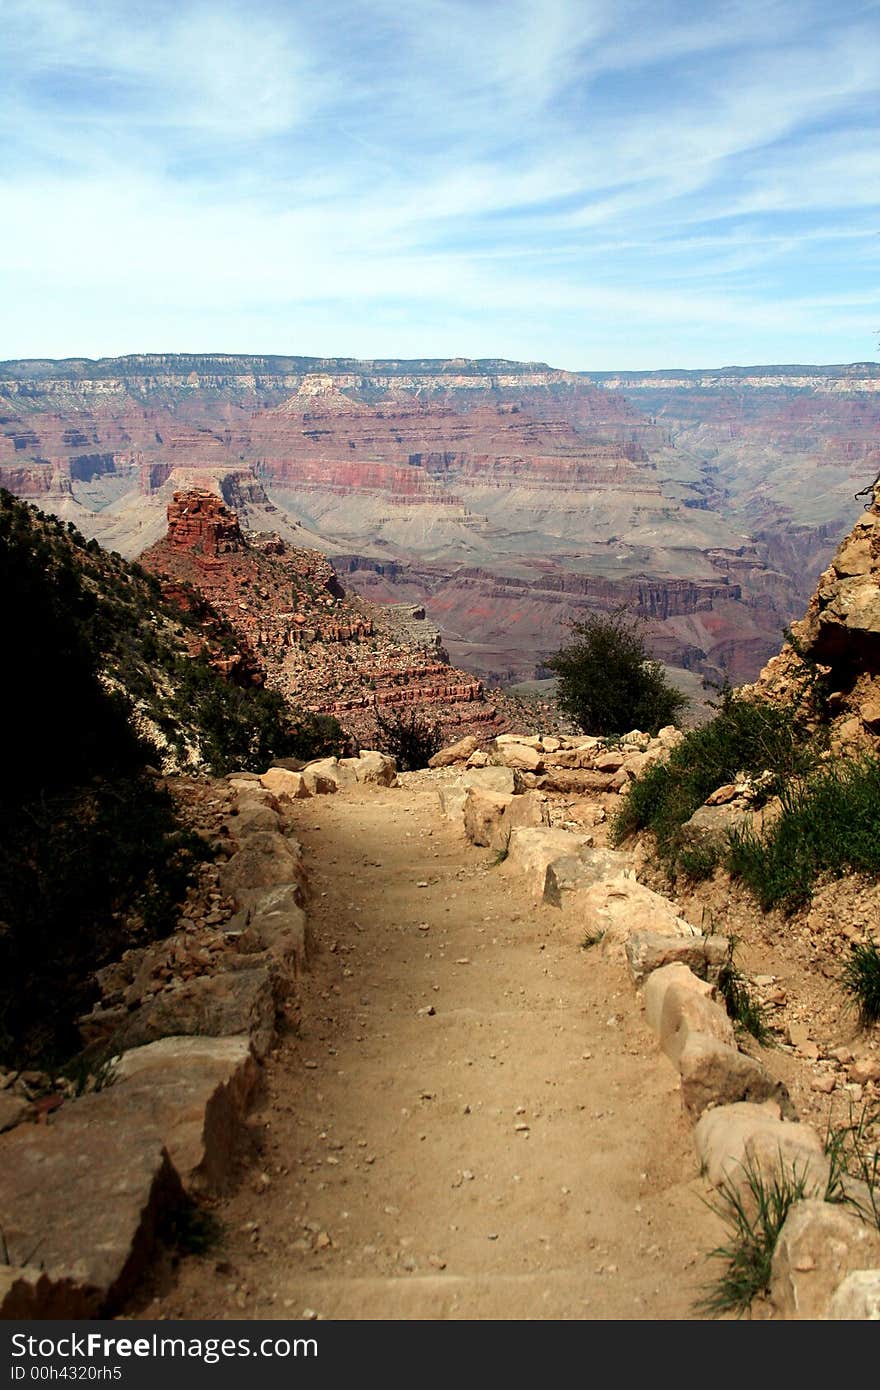 This is the hiking path that leads to the bottom of the Grand Canyon. This is the hiking path that leads to the bottom of the Grand Canyon.